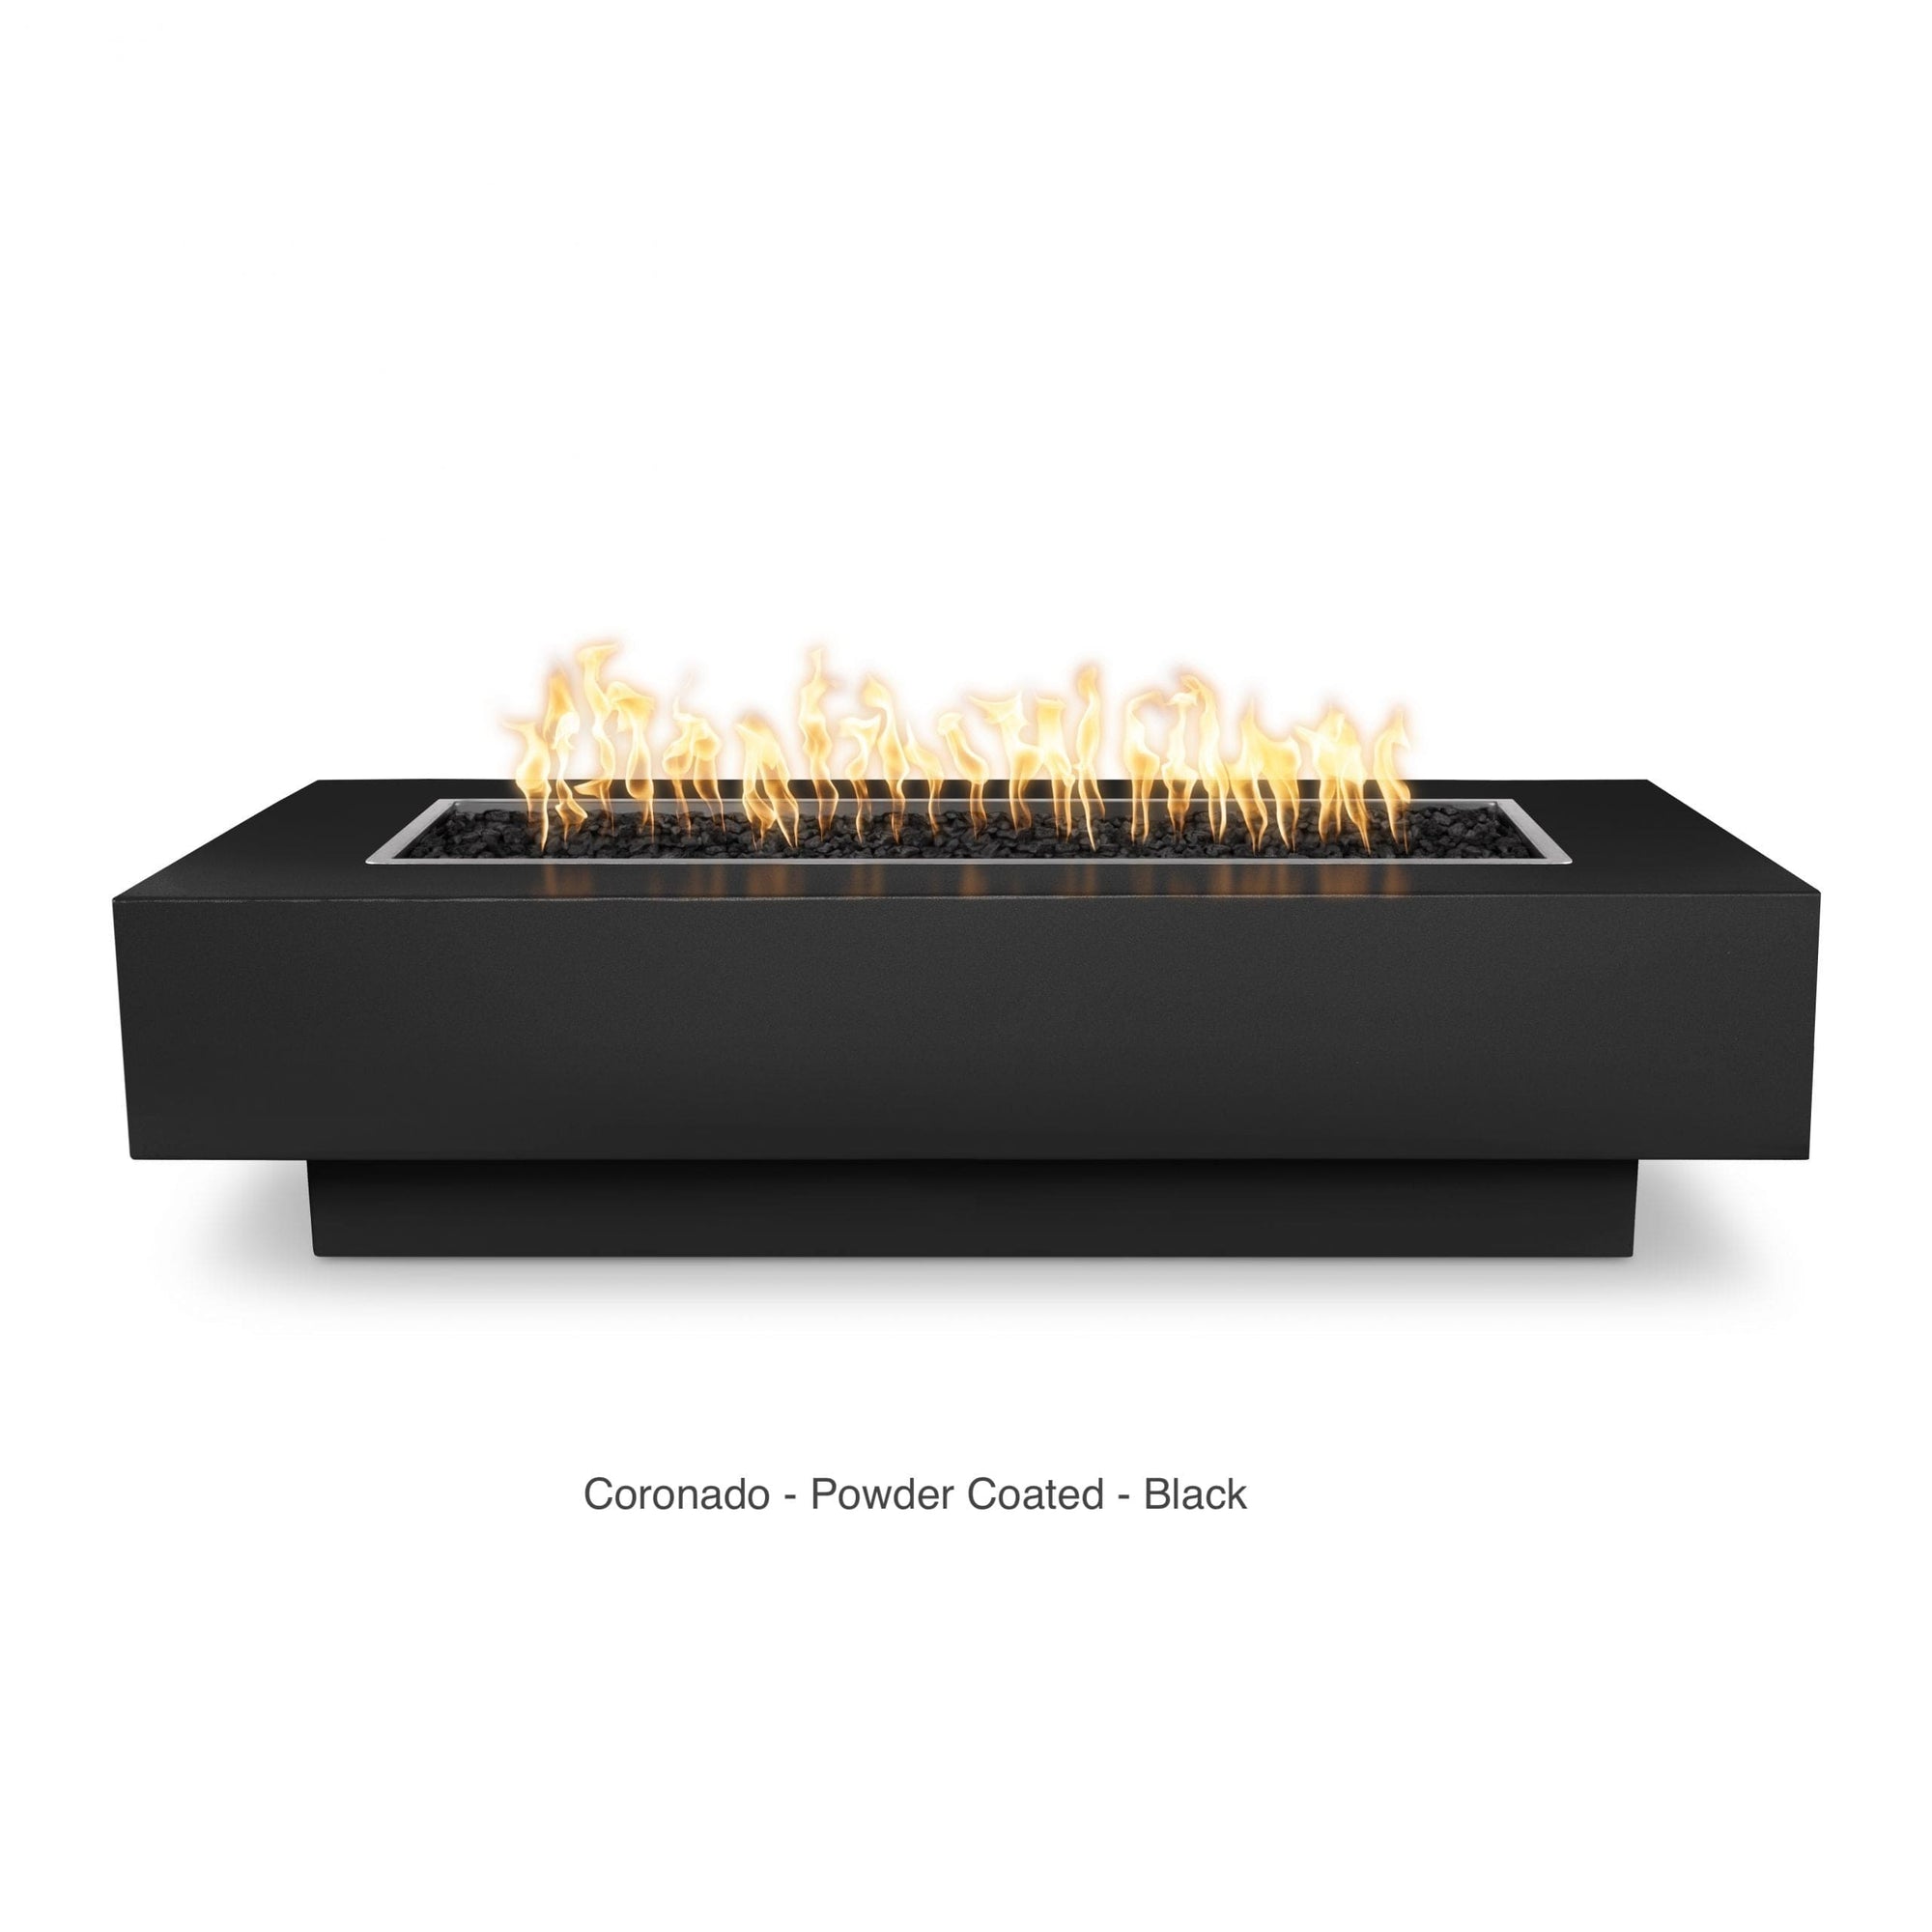 The Outdoor Plus Fire Features The Outdoor Plus 48", 60", 72", 84", 96", 108" Rectangular Coronado Fire Pit  - Metal Collection / OPT-CORCPRxx, OPT-CORCSxx, OPT-CORSSxx, OPT-CORPCxx